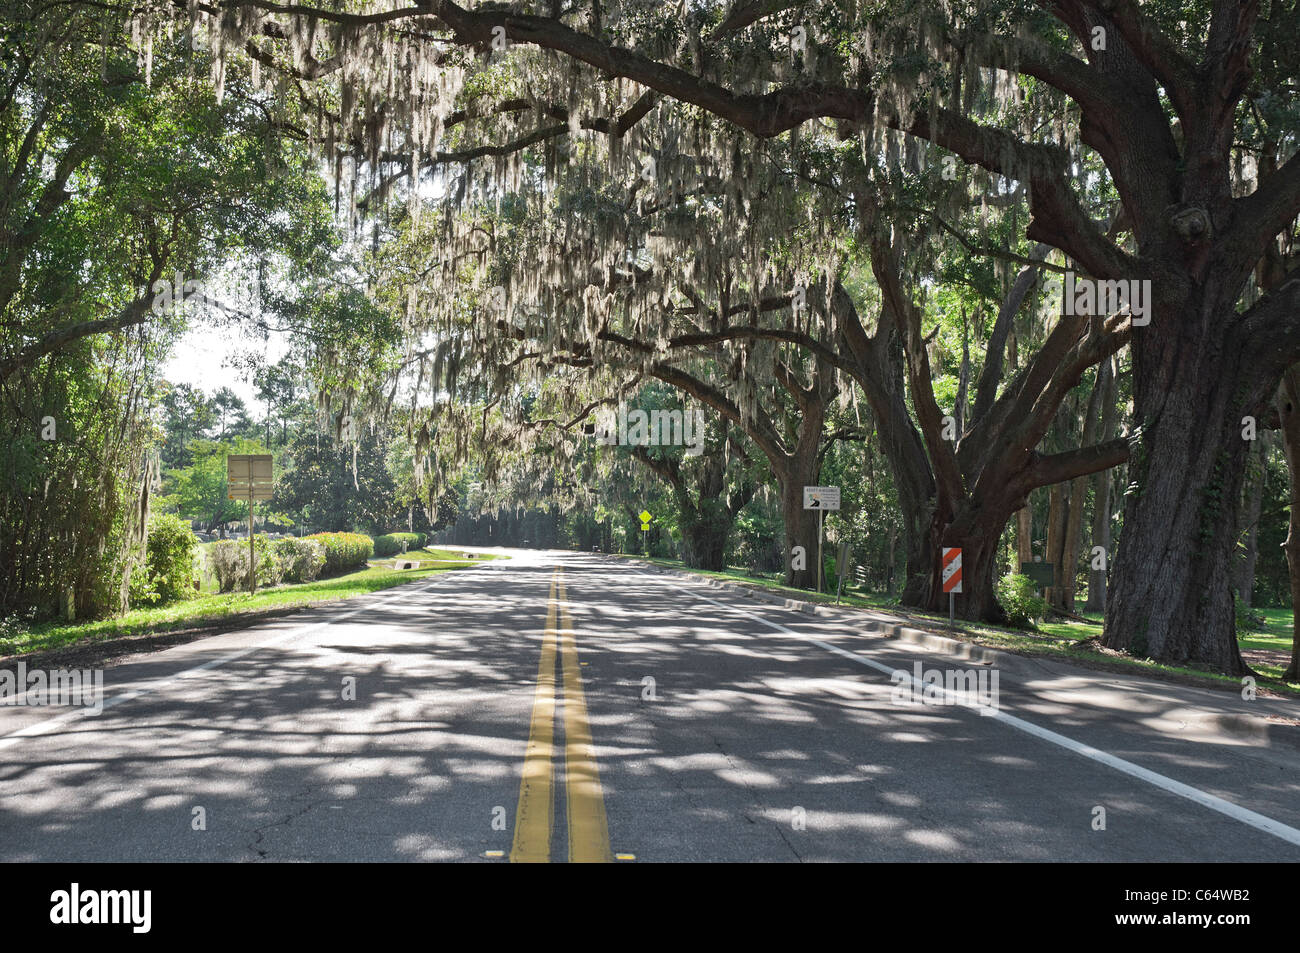 oak tree lined road by cemetery Alachua Florida Stock Photo